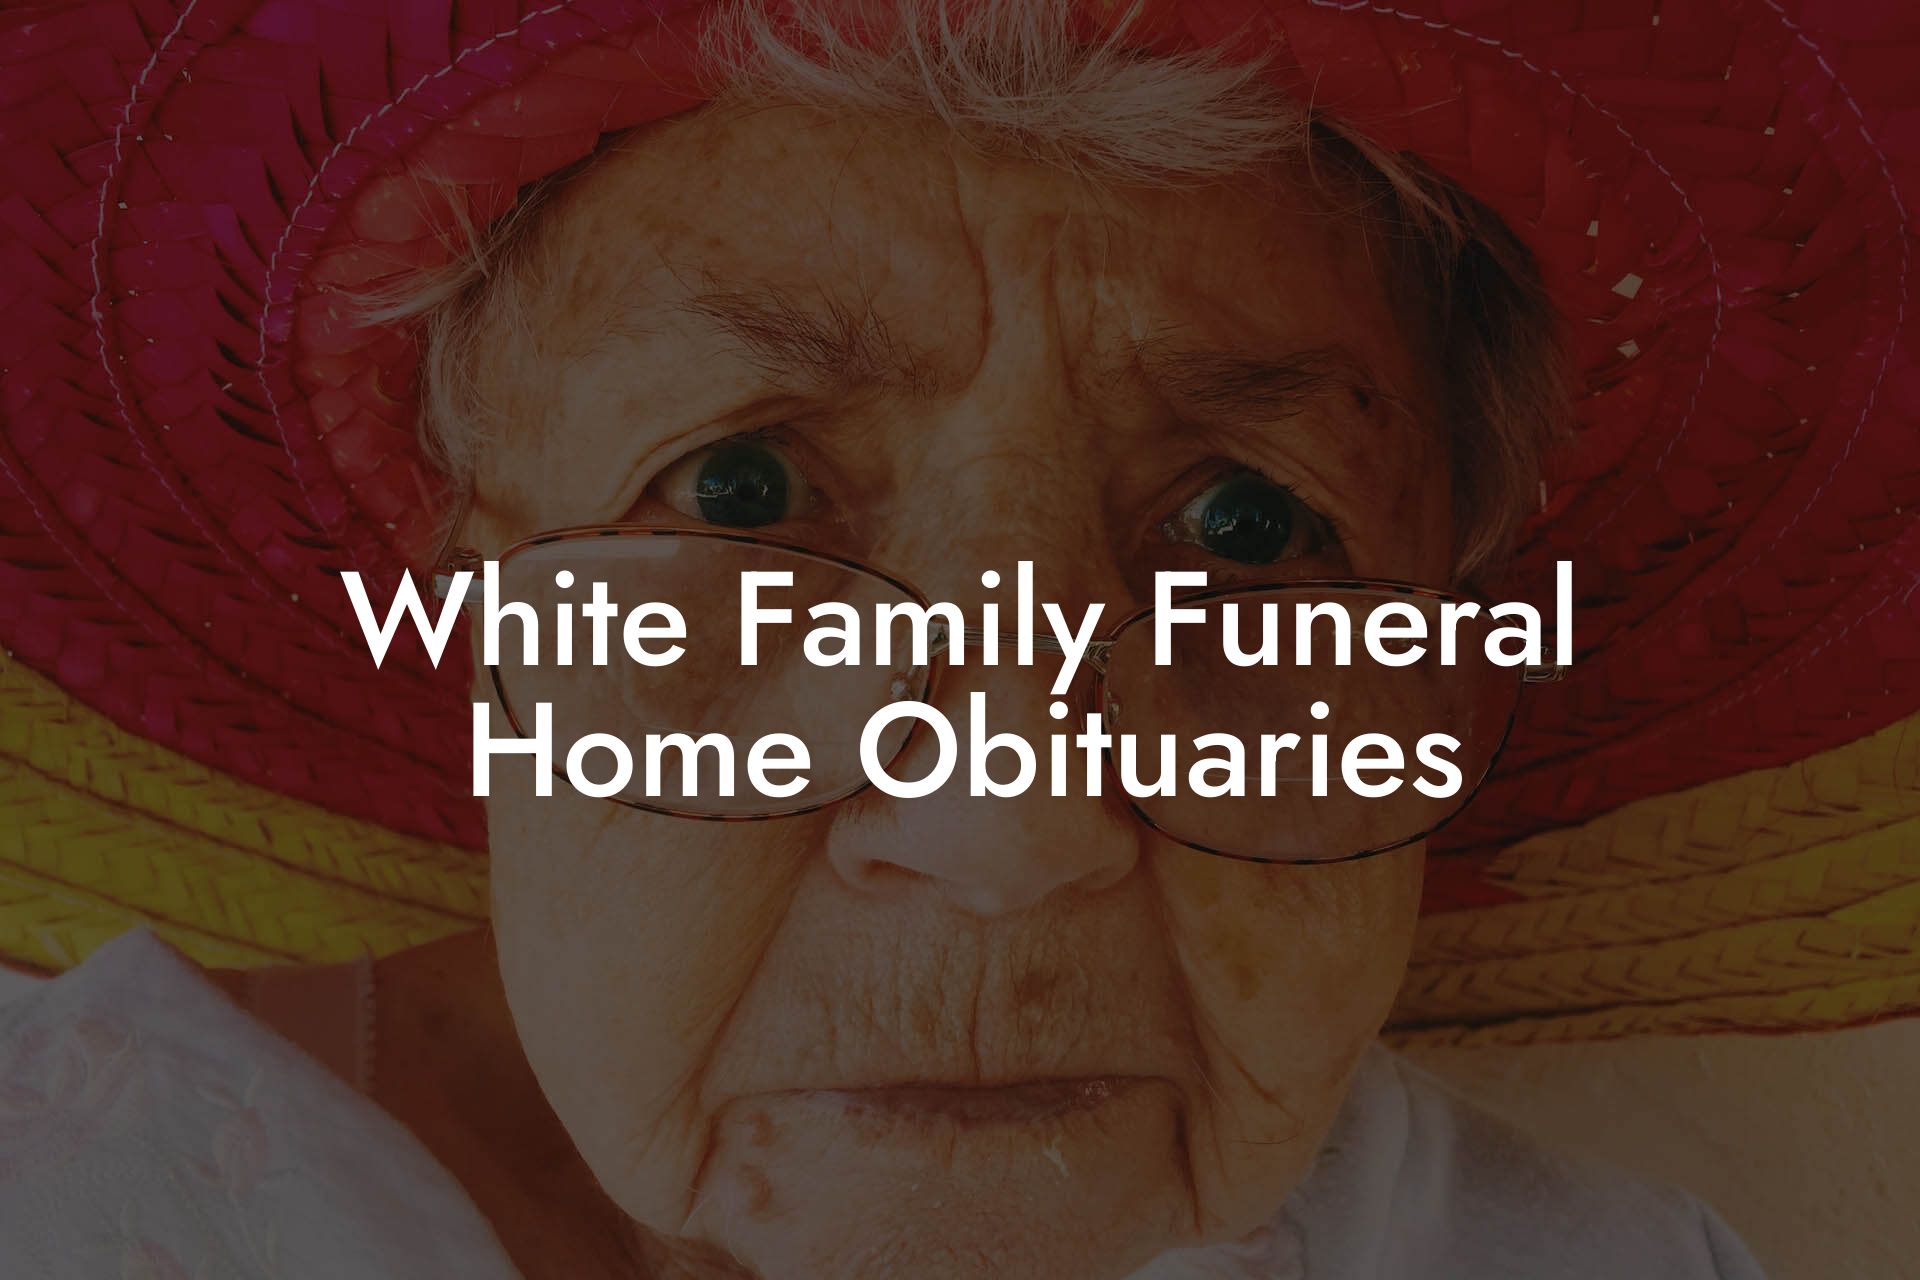 White Family Funeral Home Obituaries